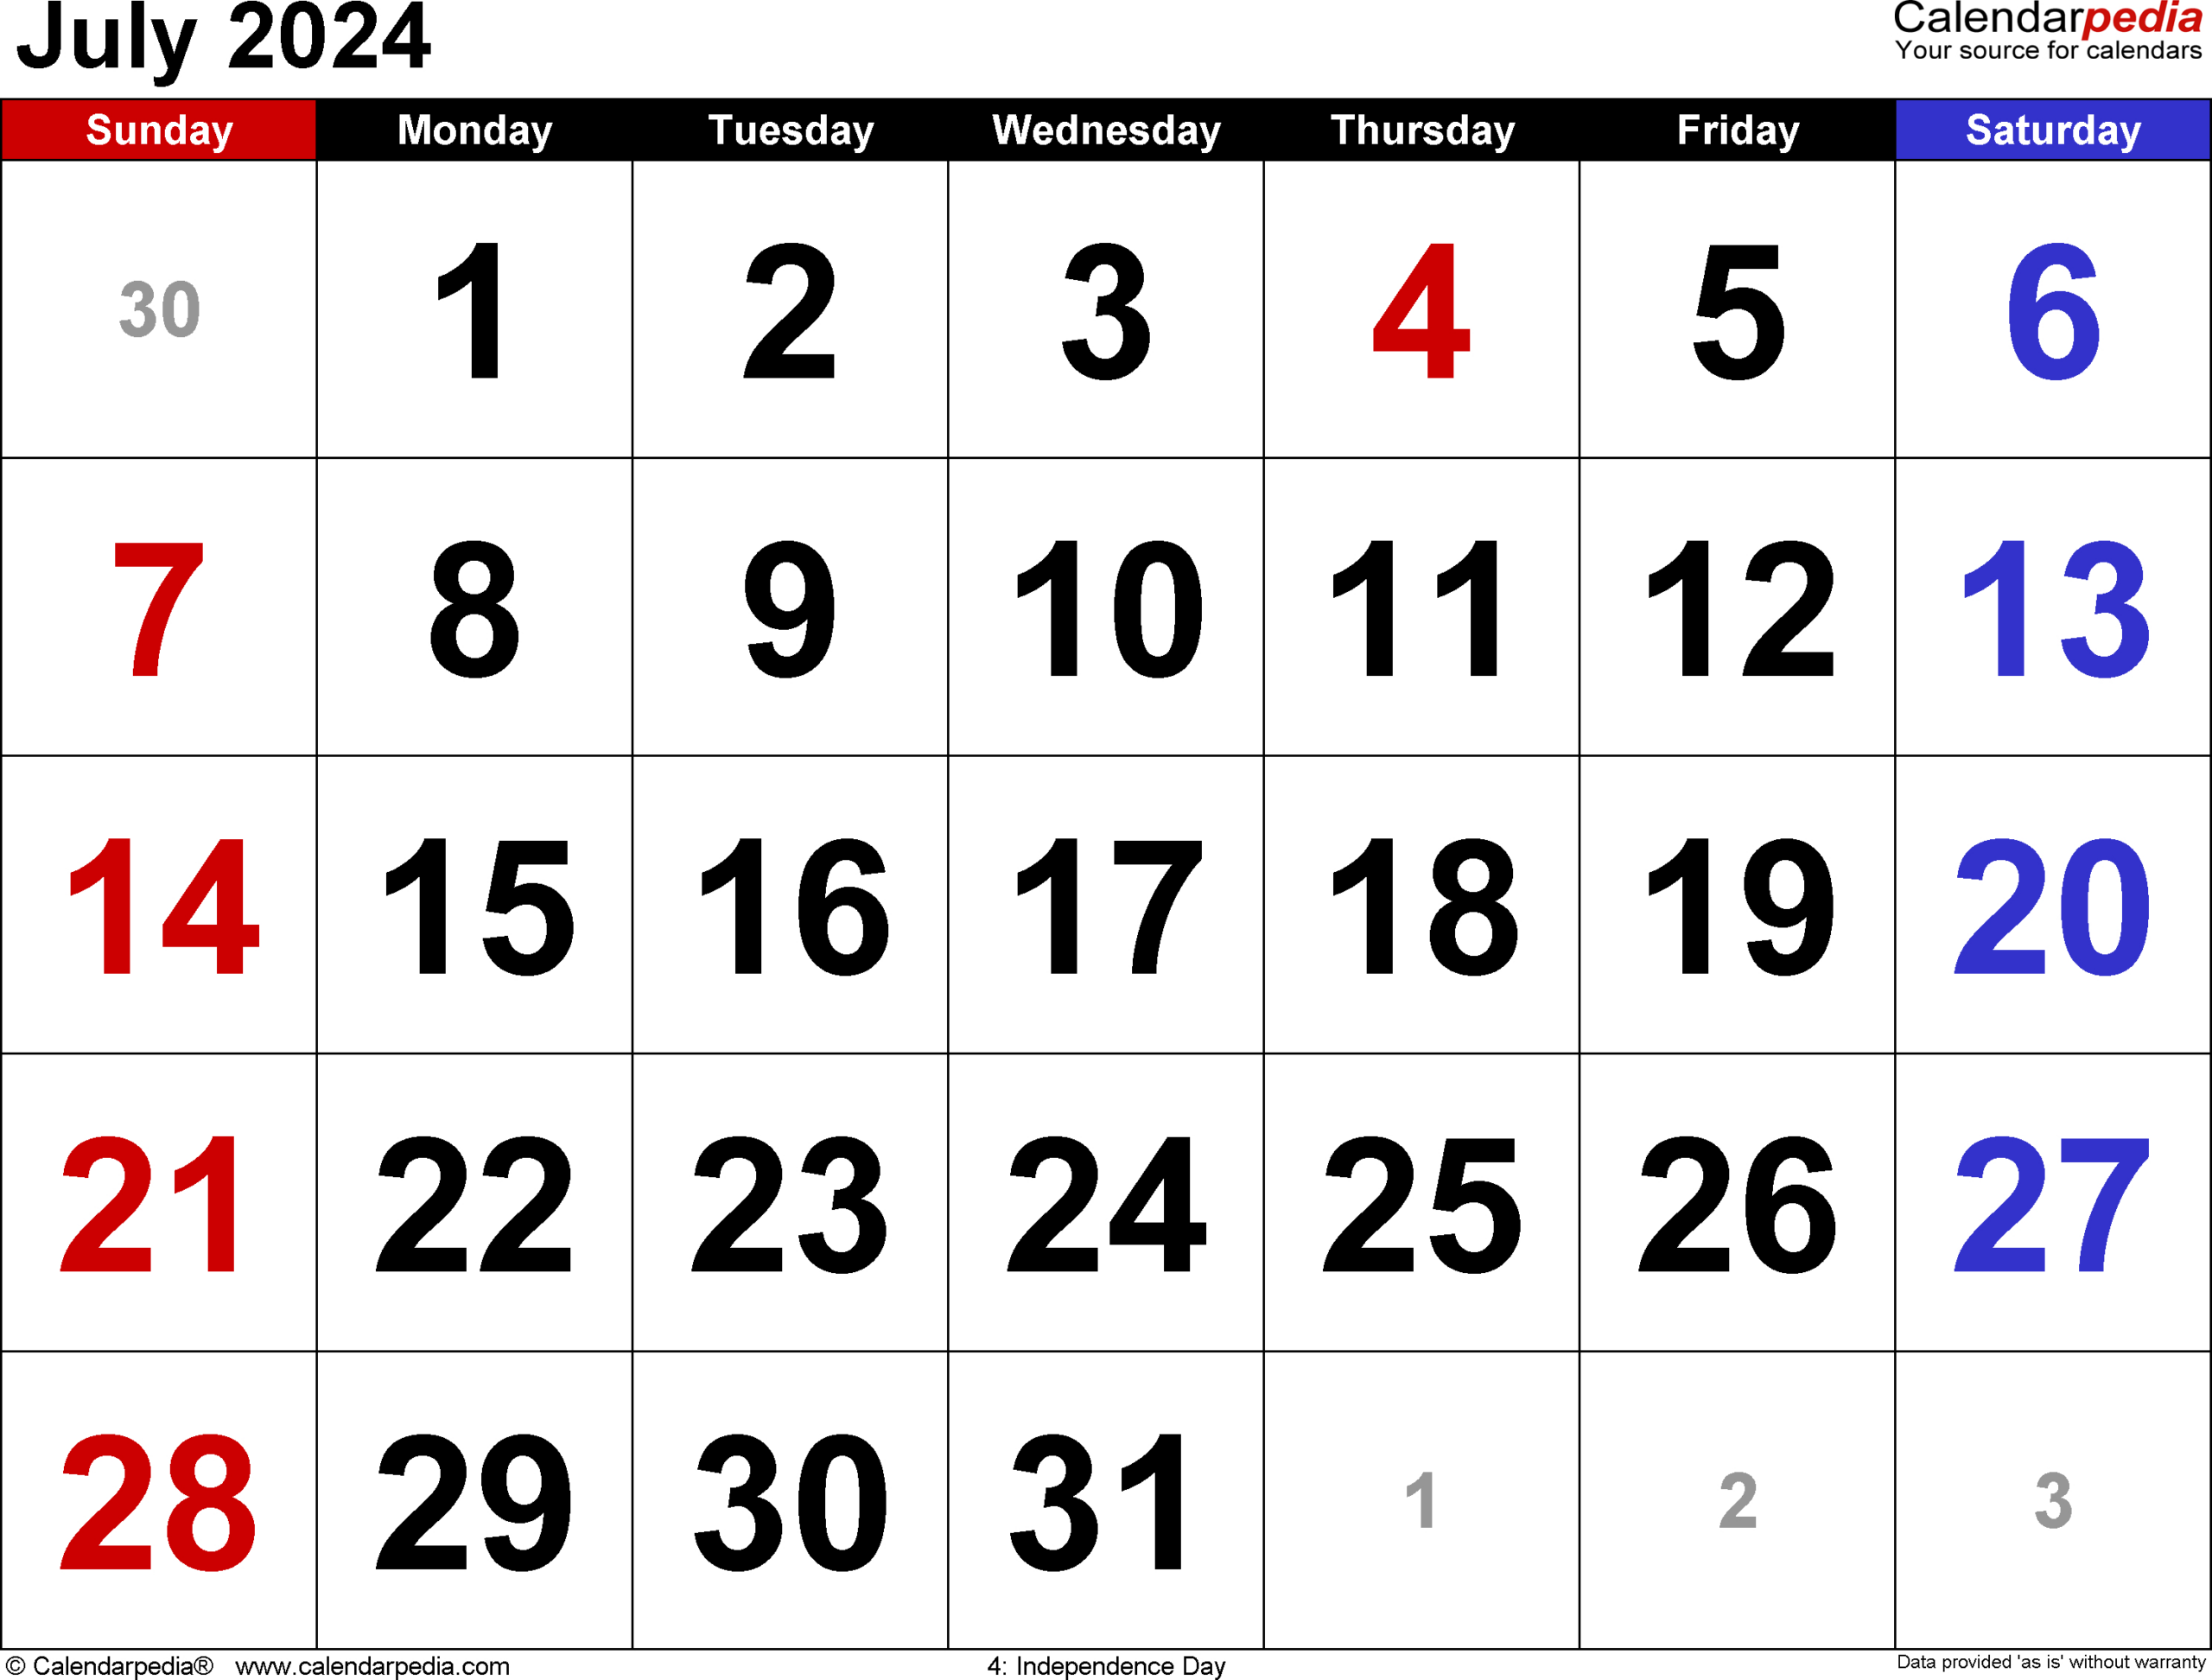 July 2024 Calendar | Templates For Word, Excel And Pdf inside Word Calendar July 2024